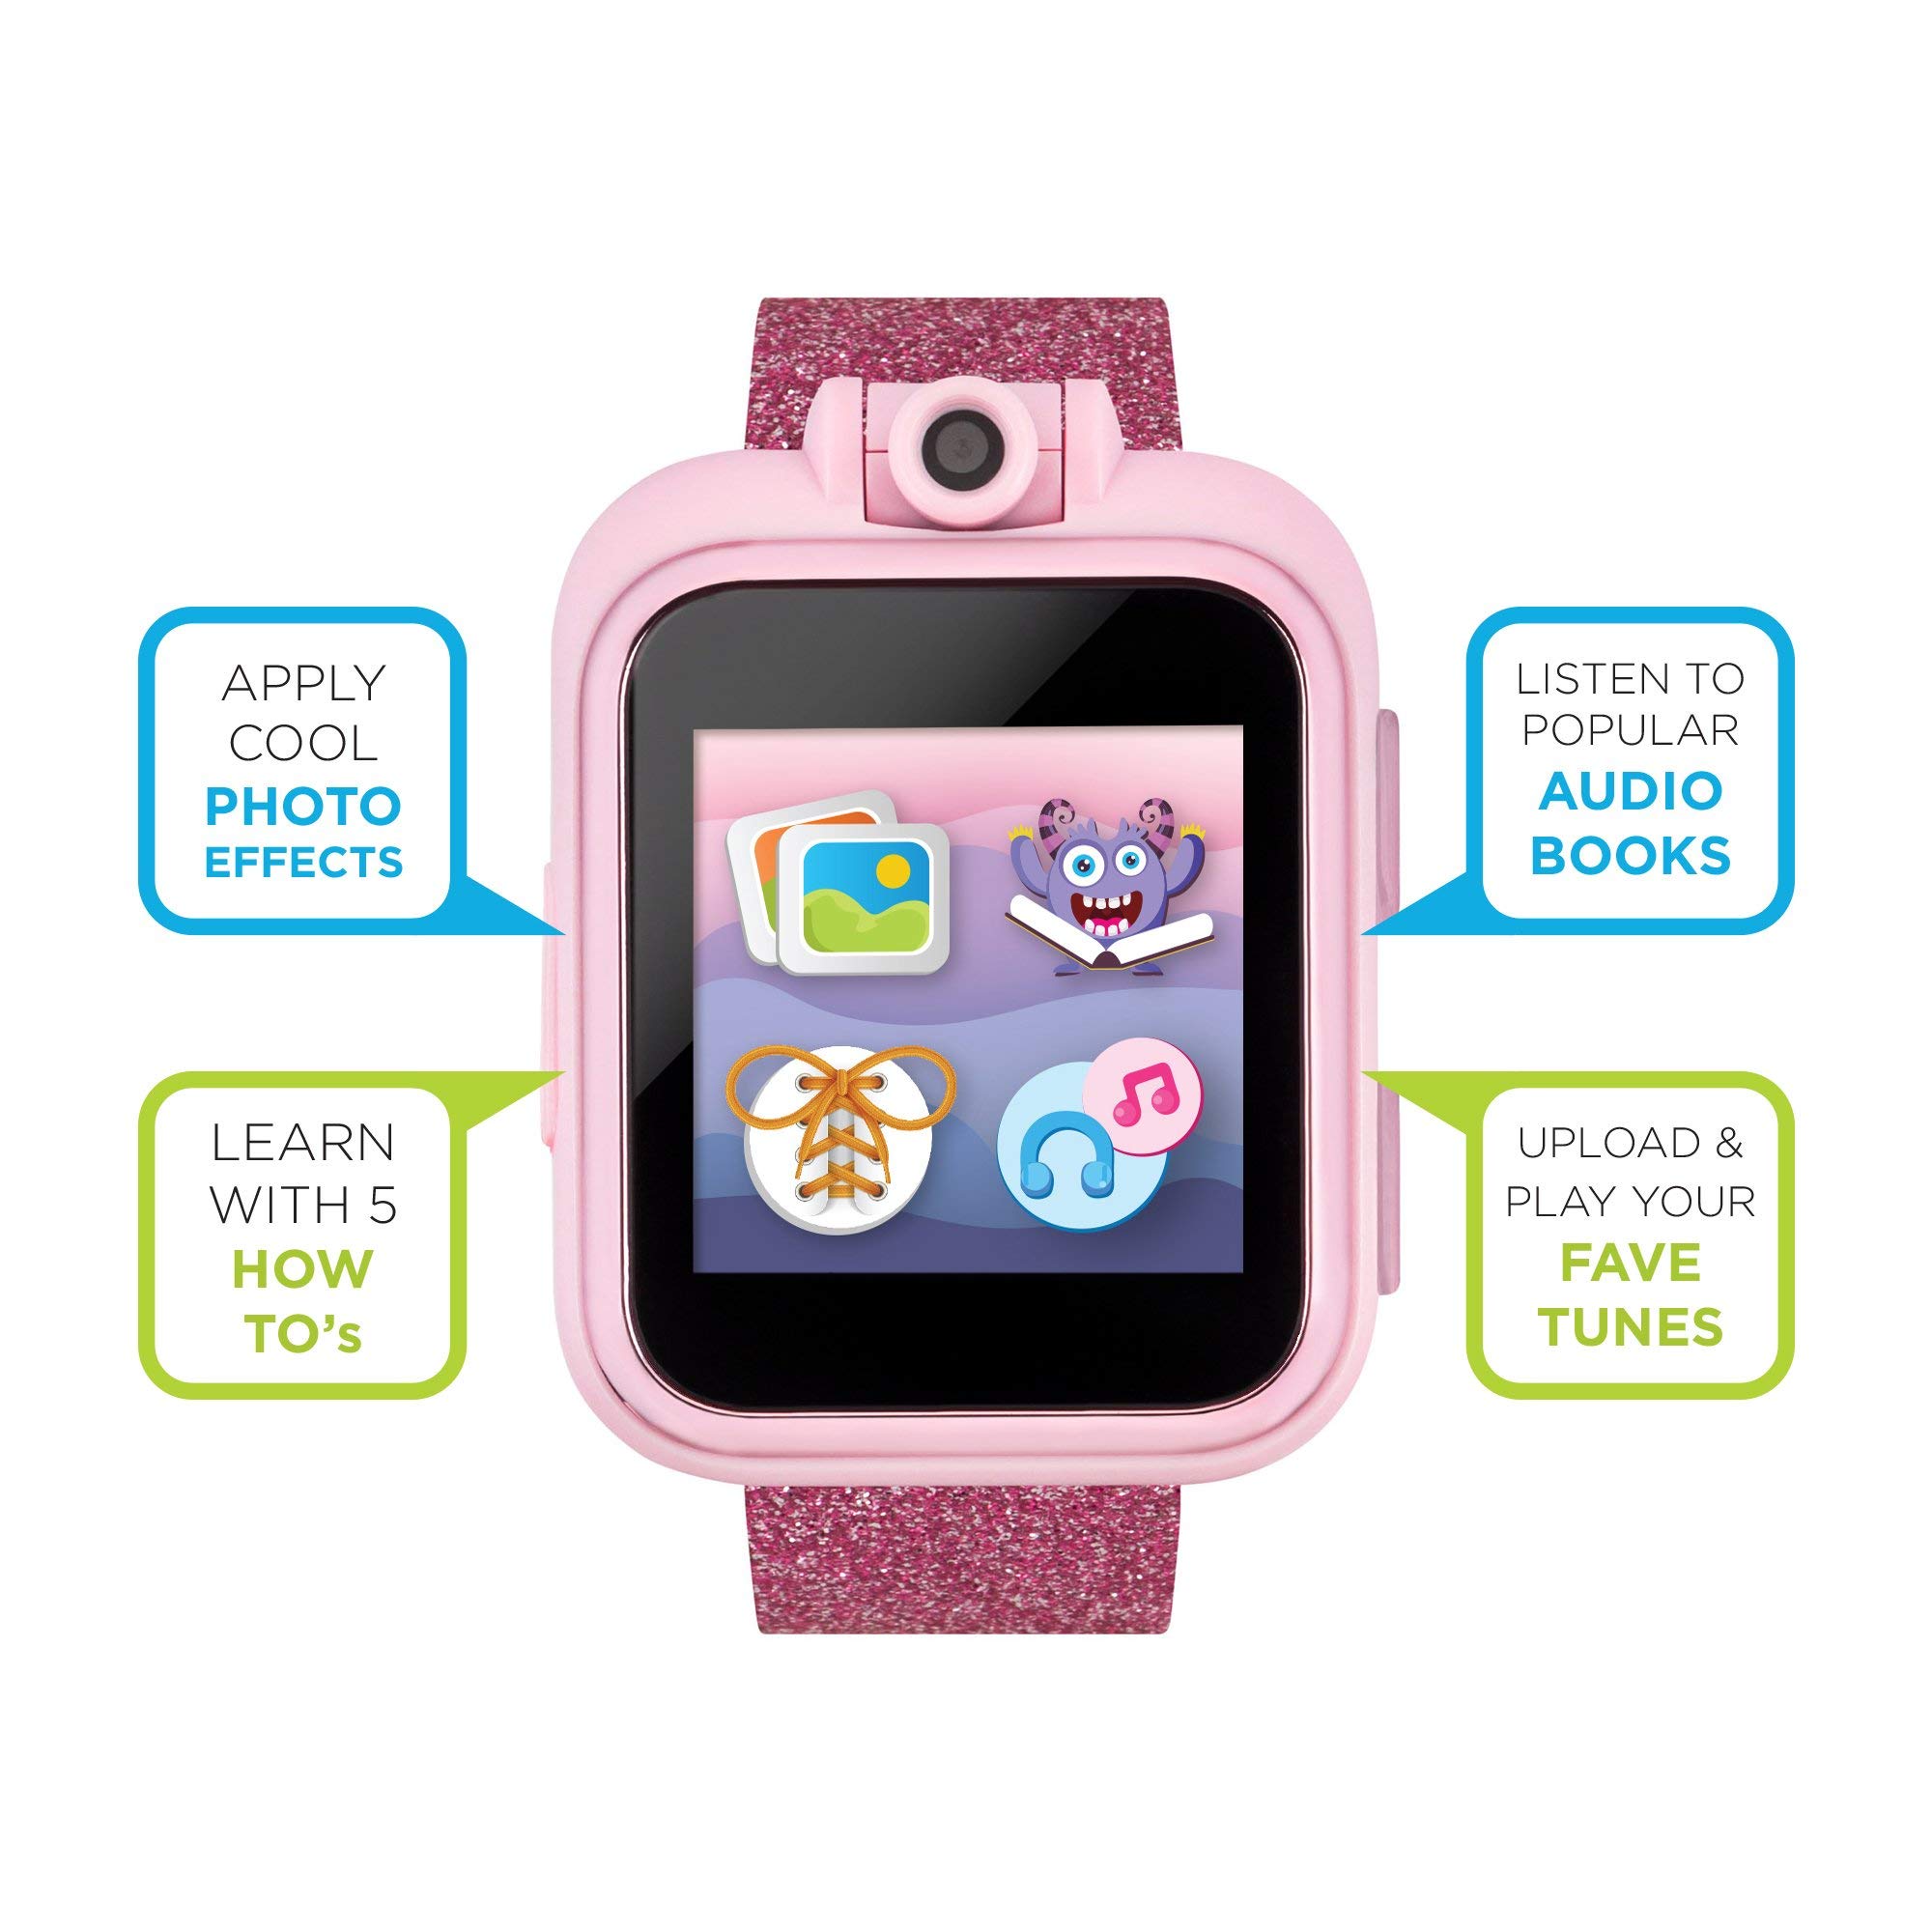 Kids Smartwatch PlayZoom 2 with Swivel Selfie Camera, STEM Learning, 20+ Games, Audio Bedtime Stories, Store Music for Kids Toddlers Boys Girls